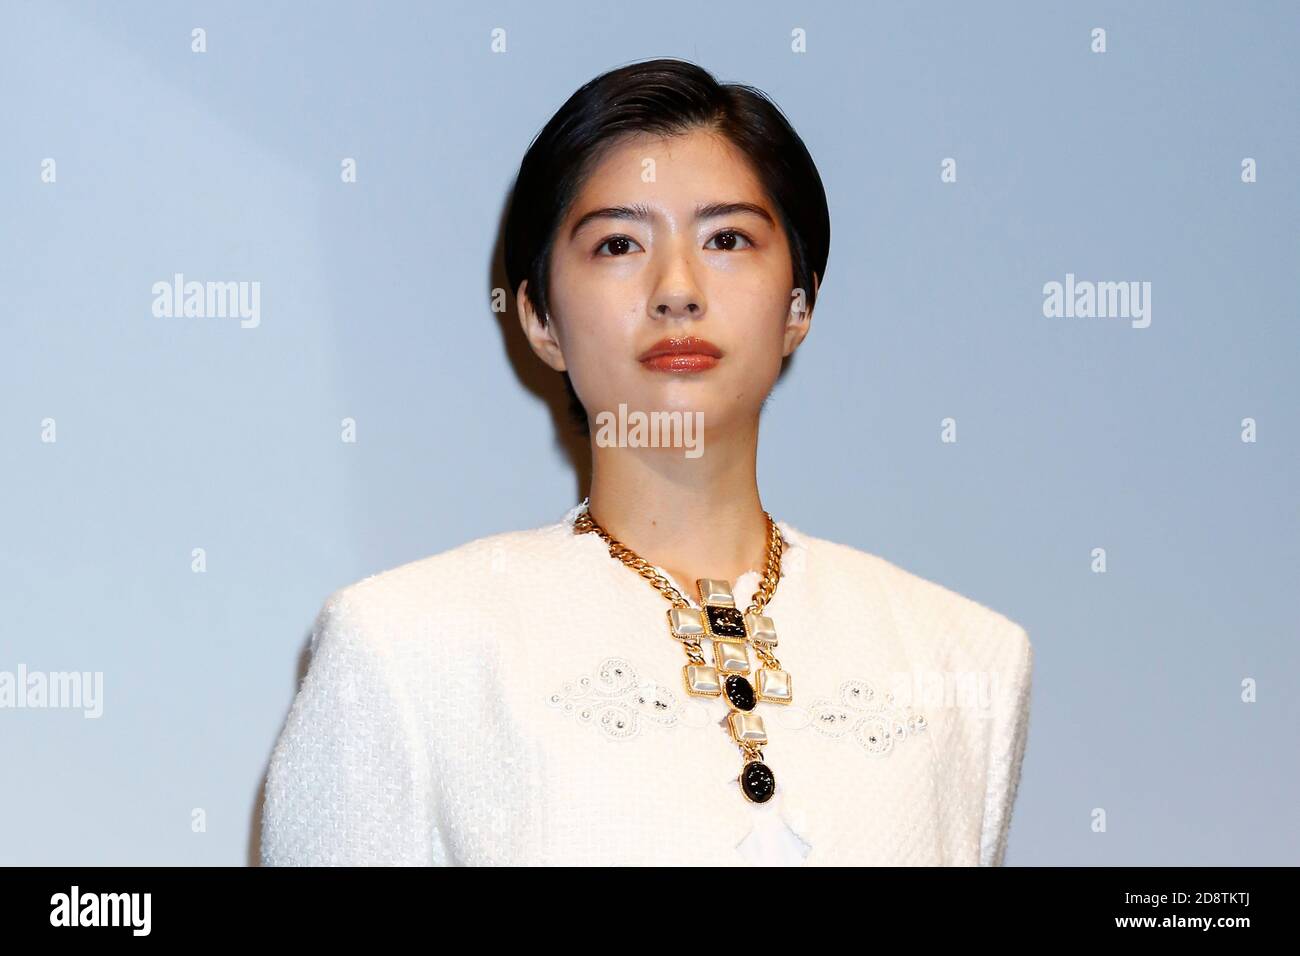 November 1, 2020, Tokyo, Japan: Actress Yui Sakuma attends the 'Eternally Younger Than Those Idiots' stage appearance during the 33rd Tokyo International Film Festival at EX Theater Roppongi. The film festival runs from October 31 to November 9. (Credit Image: © Rodrigo Reyes Marin/ZUMA Wire) Stock Photo